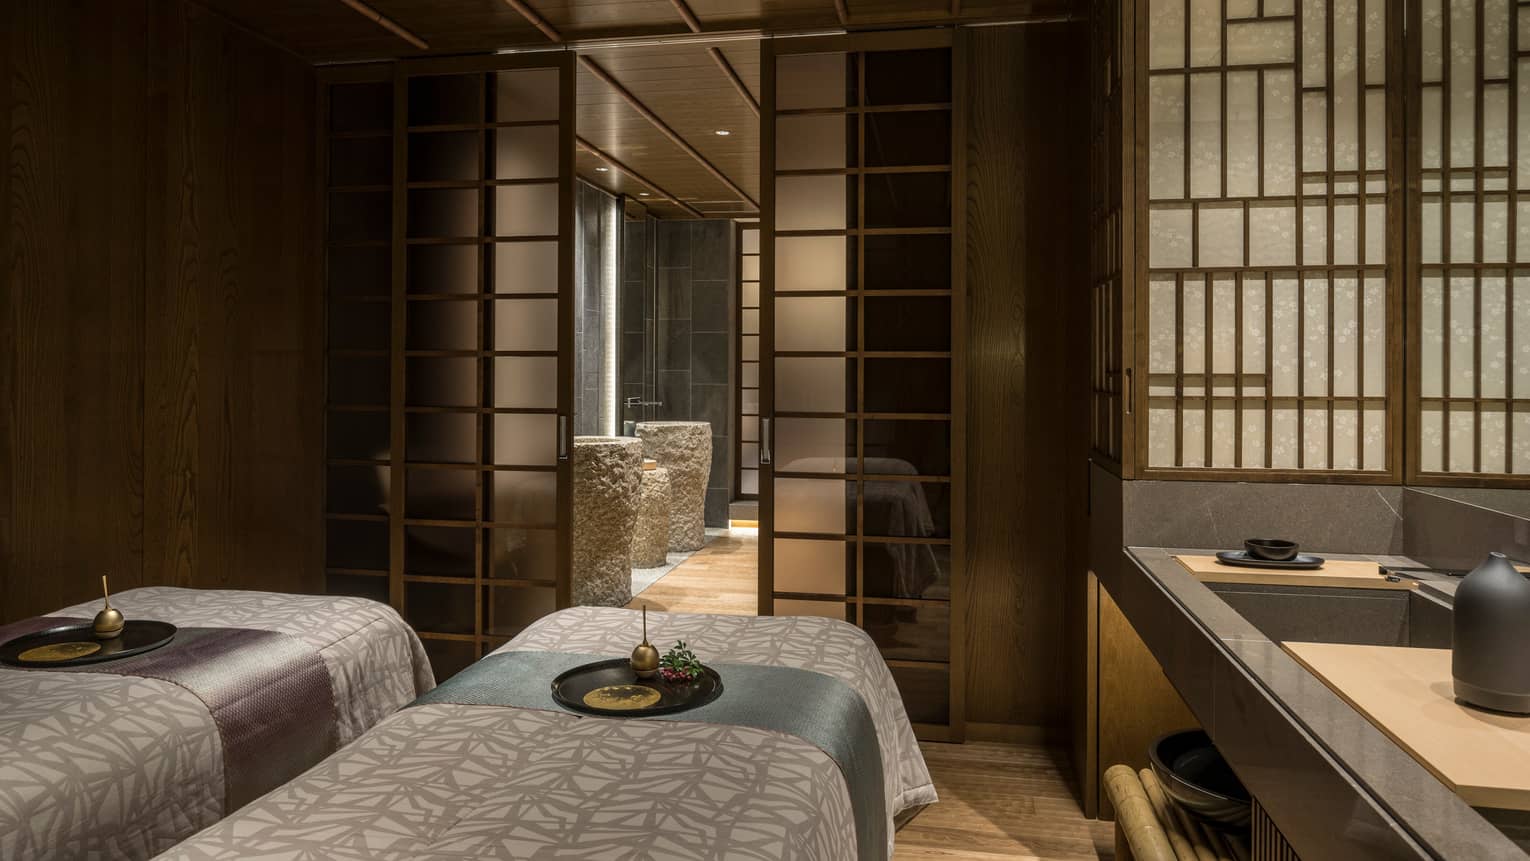 Couples massage beds in dark spa treatment room behind screen